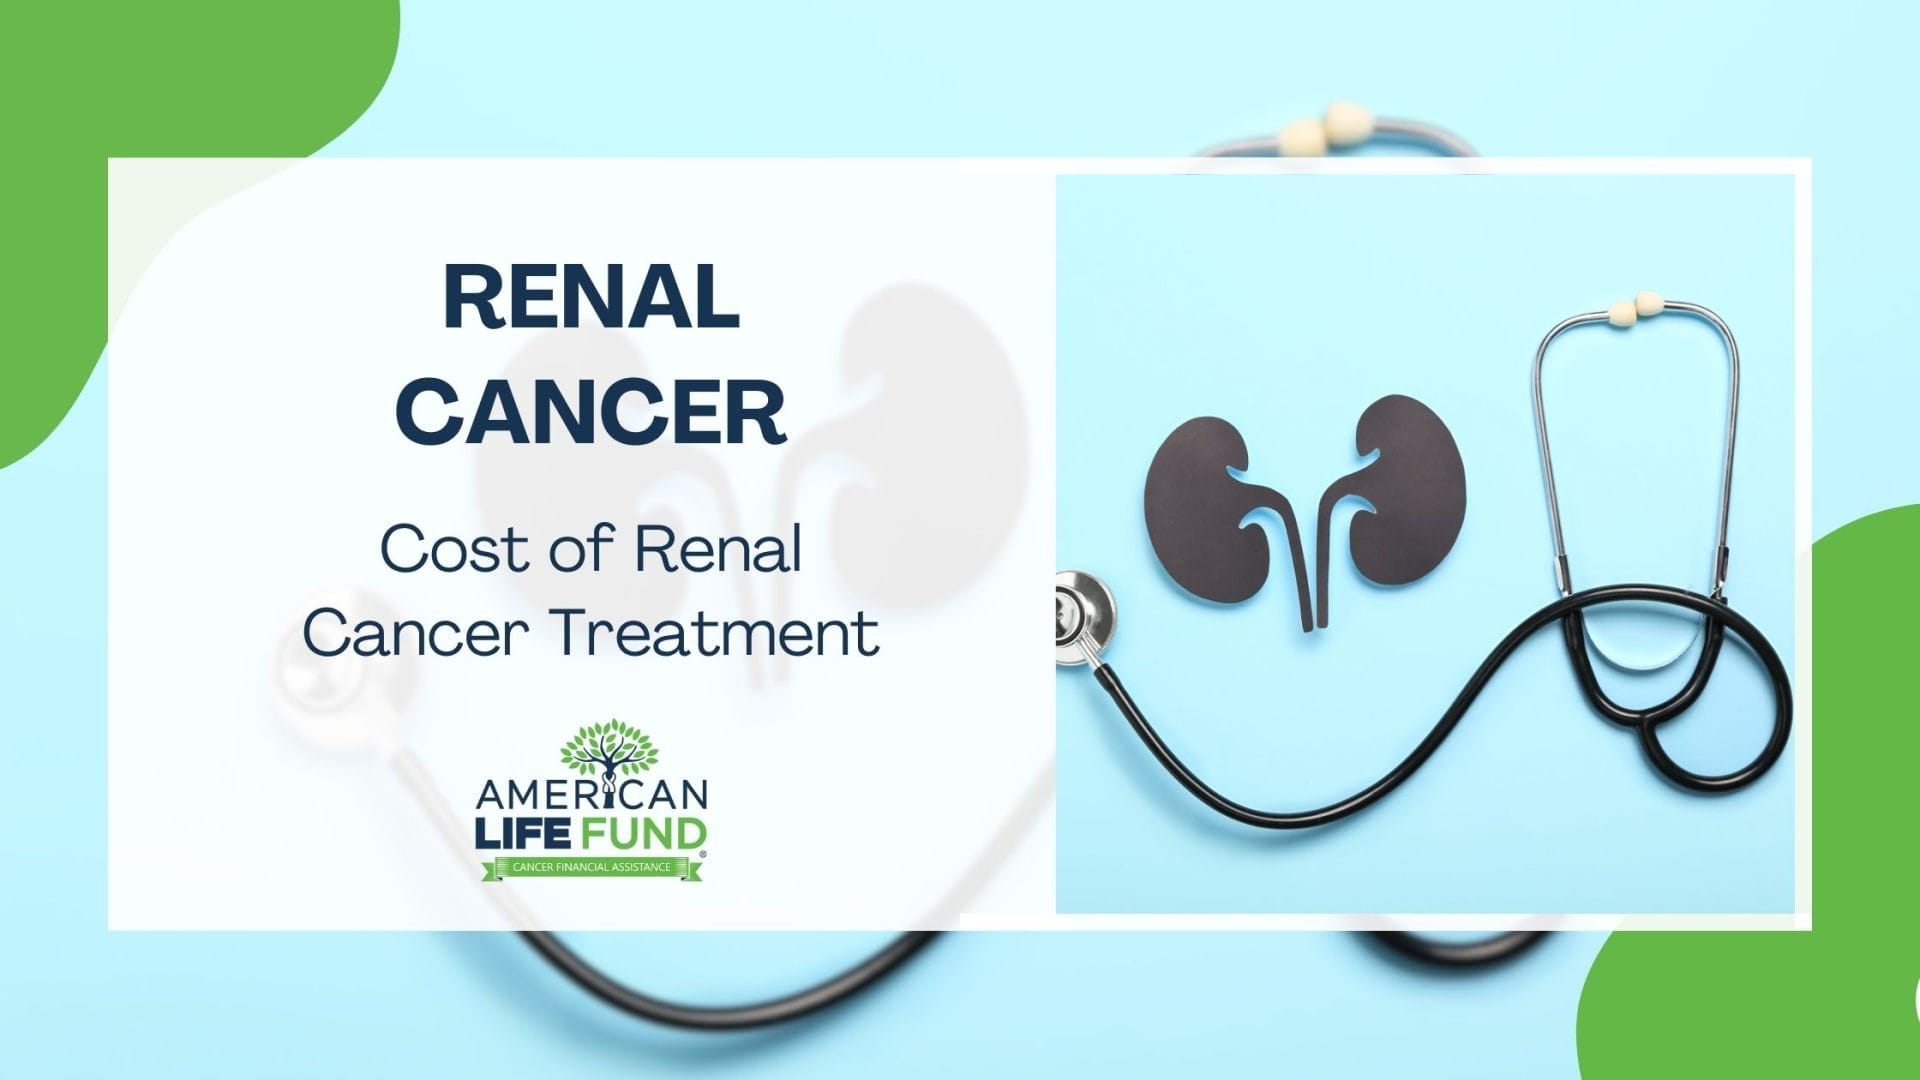 An informative graphic for a blog post featuring the text 'Renal Cancer: Cost of Renal Cancer Treatment' with a backdrop of a stylized kidney shape and a stethoscope. The American Life Fund logo is displayed, indicating financial assistance for Renal Cancer Treatment Costs. The design incorporates a soothing blue and green color scheme.